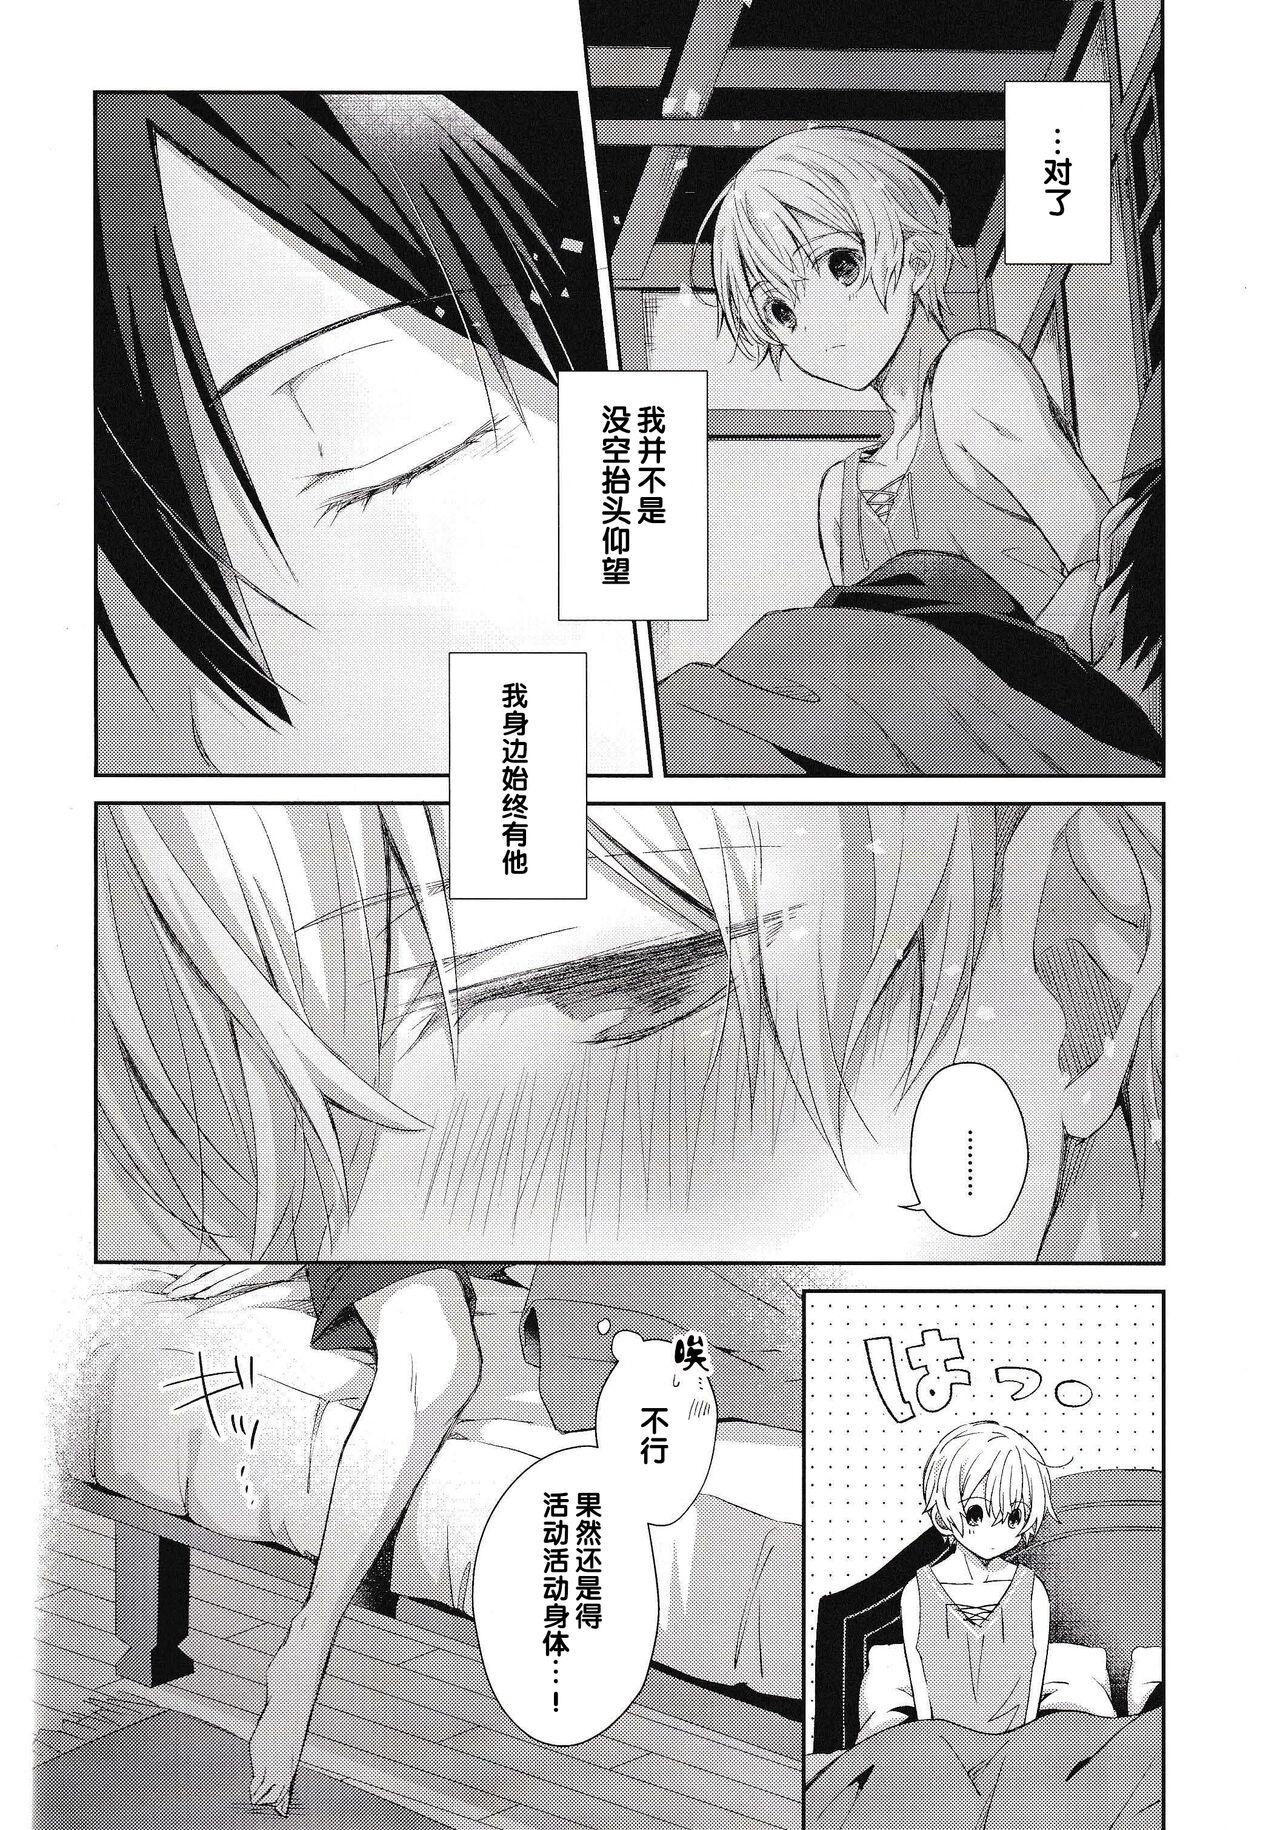 Amazing Oyasumi After Motion - Sword art online Fudendo - Page 3